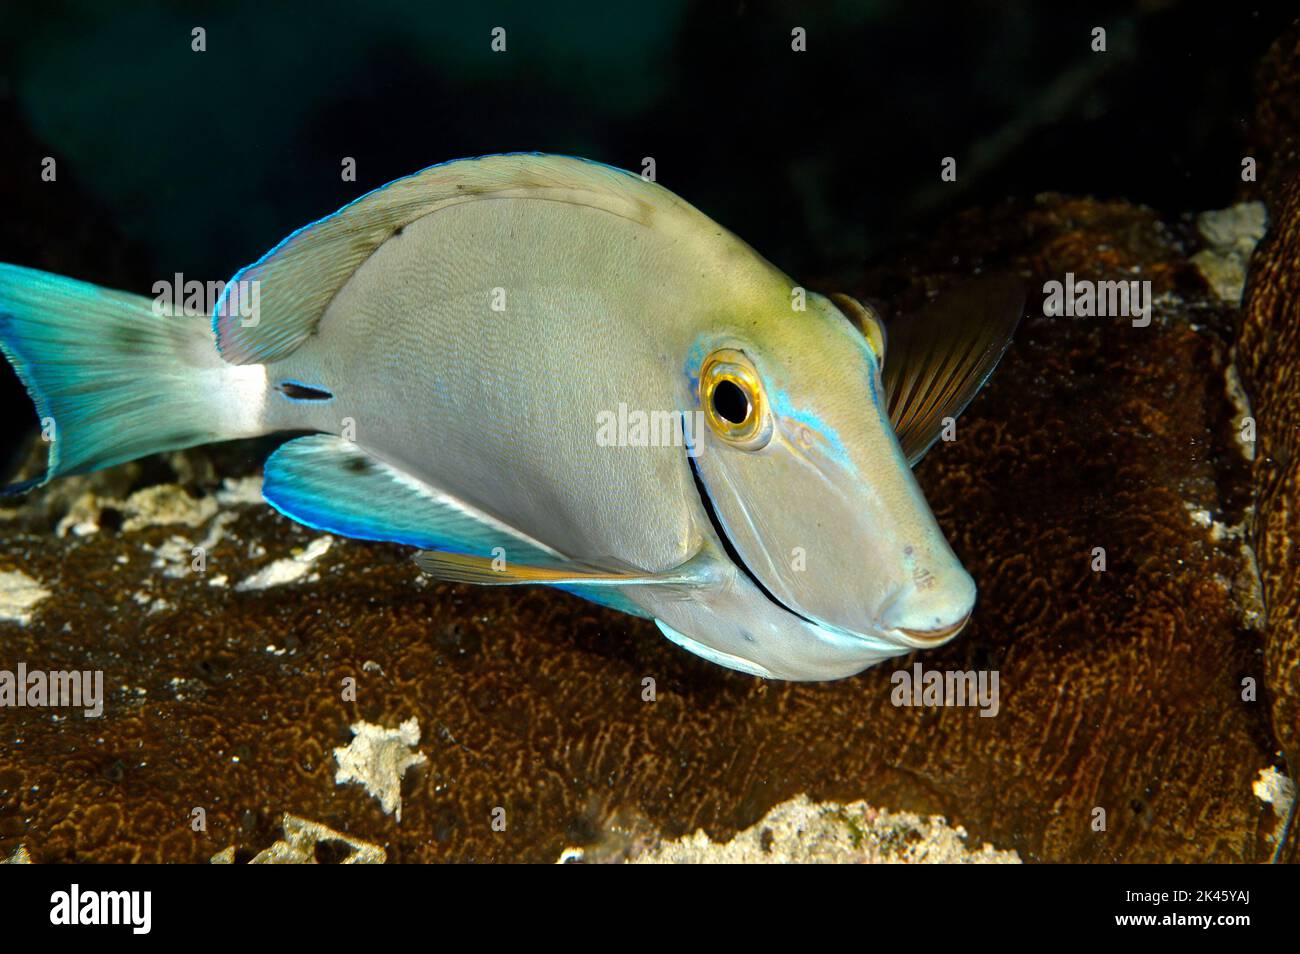 A colorful, yet shy, surgeonfish, swims along a reef in Roatan Honduras at night looking for small crabs to feed on. Stock Photo